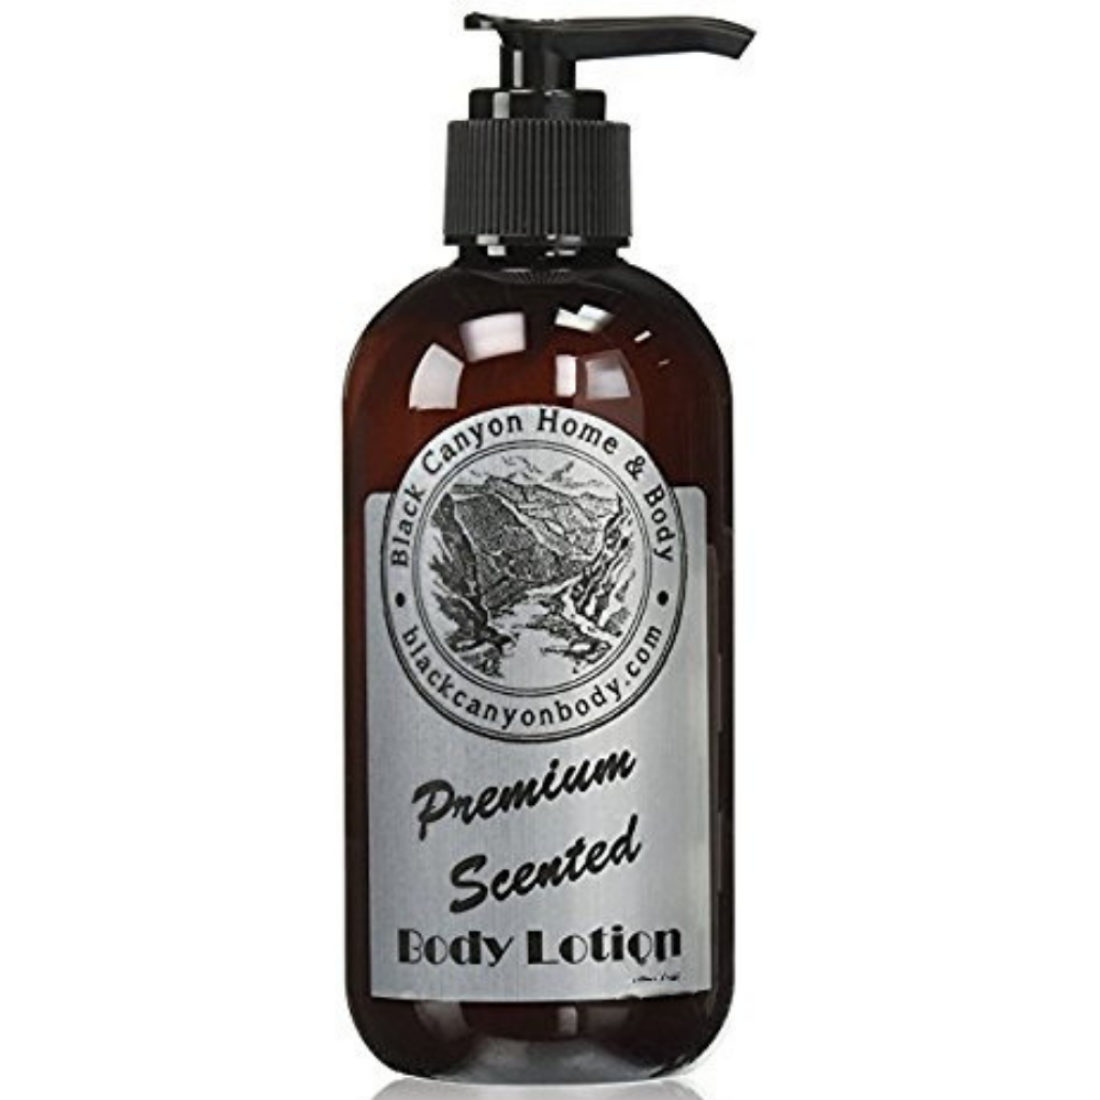 Black Canyon Black Cherry Cream Scented Luxury Body Lotion with Lanolin and Jojoba Oil